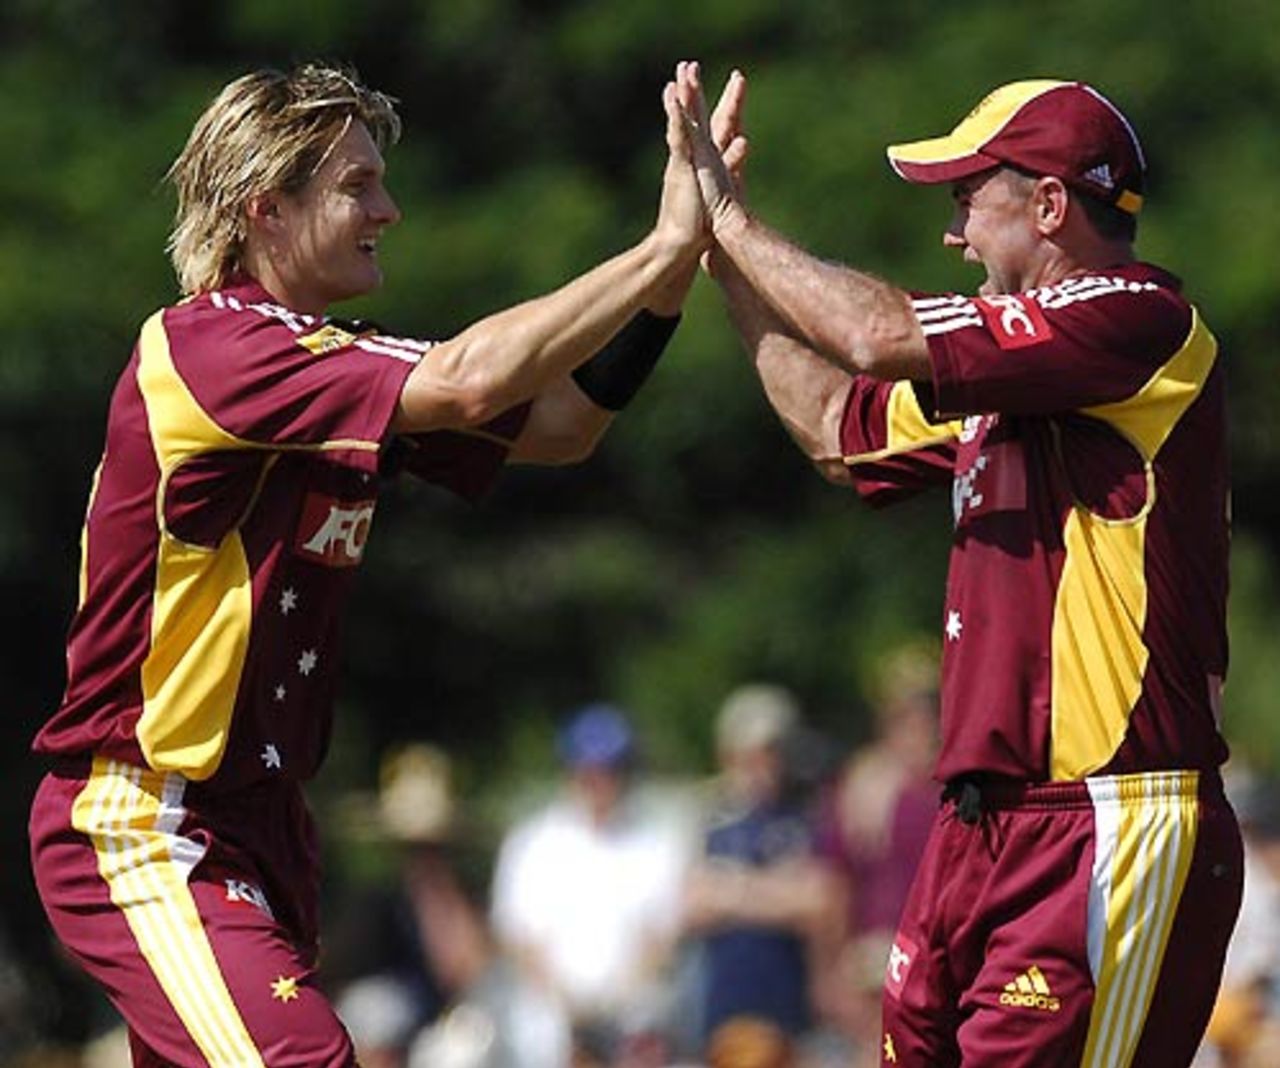 Shane Watson and Jimmy Maher celebrate a wicket, Queensland v Victoria, Twenty20 Big Bash, Townsville, December 31, 2007